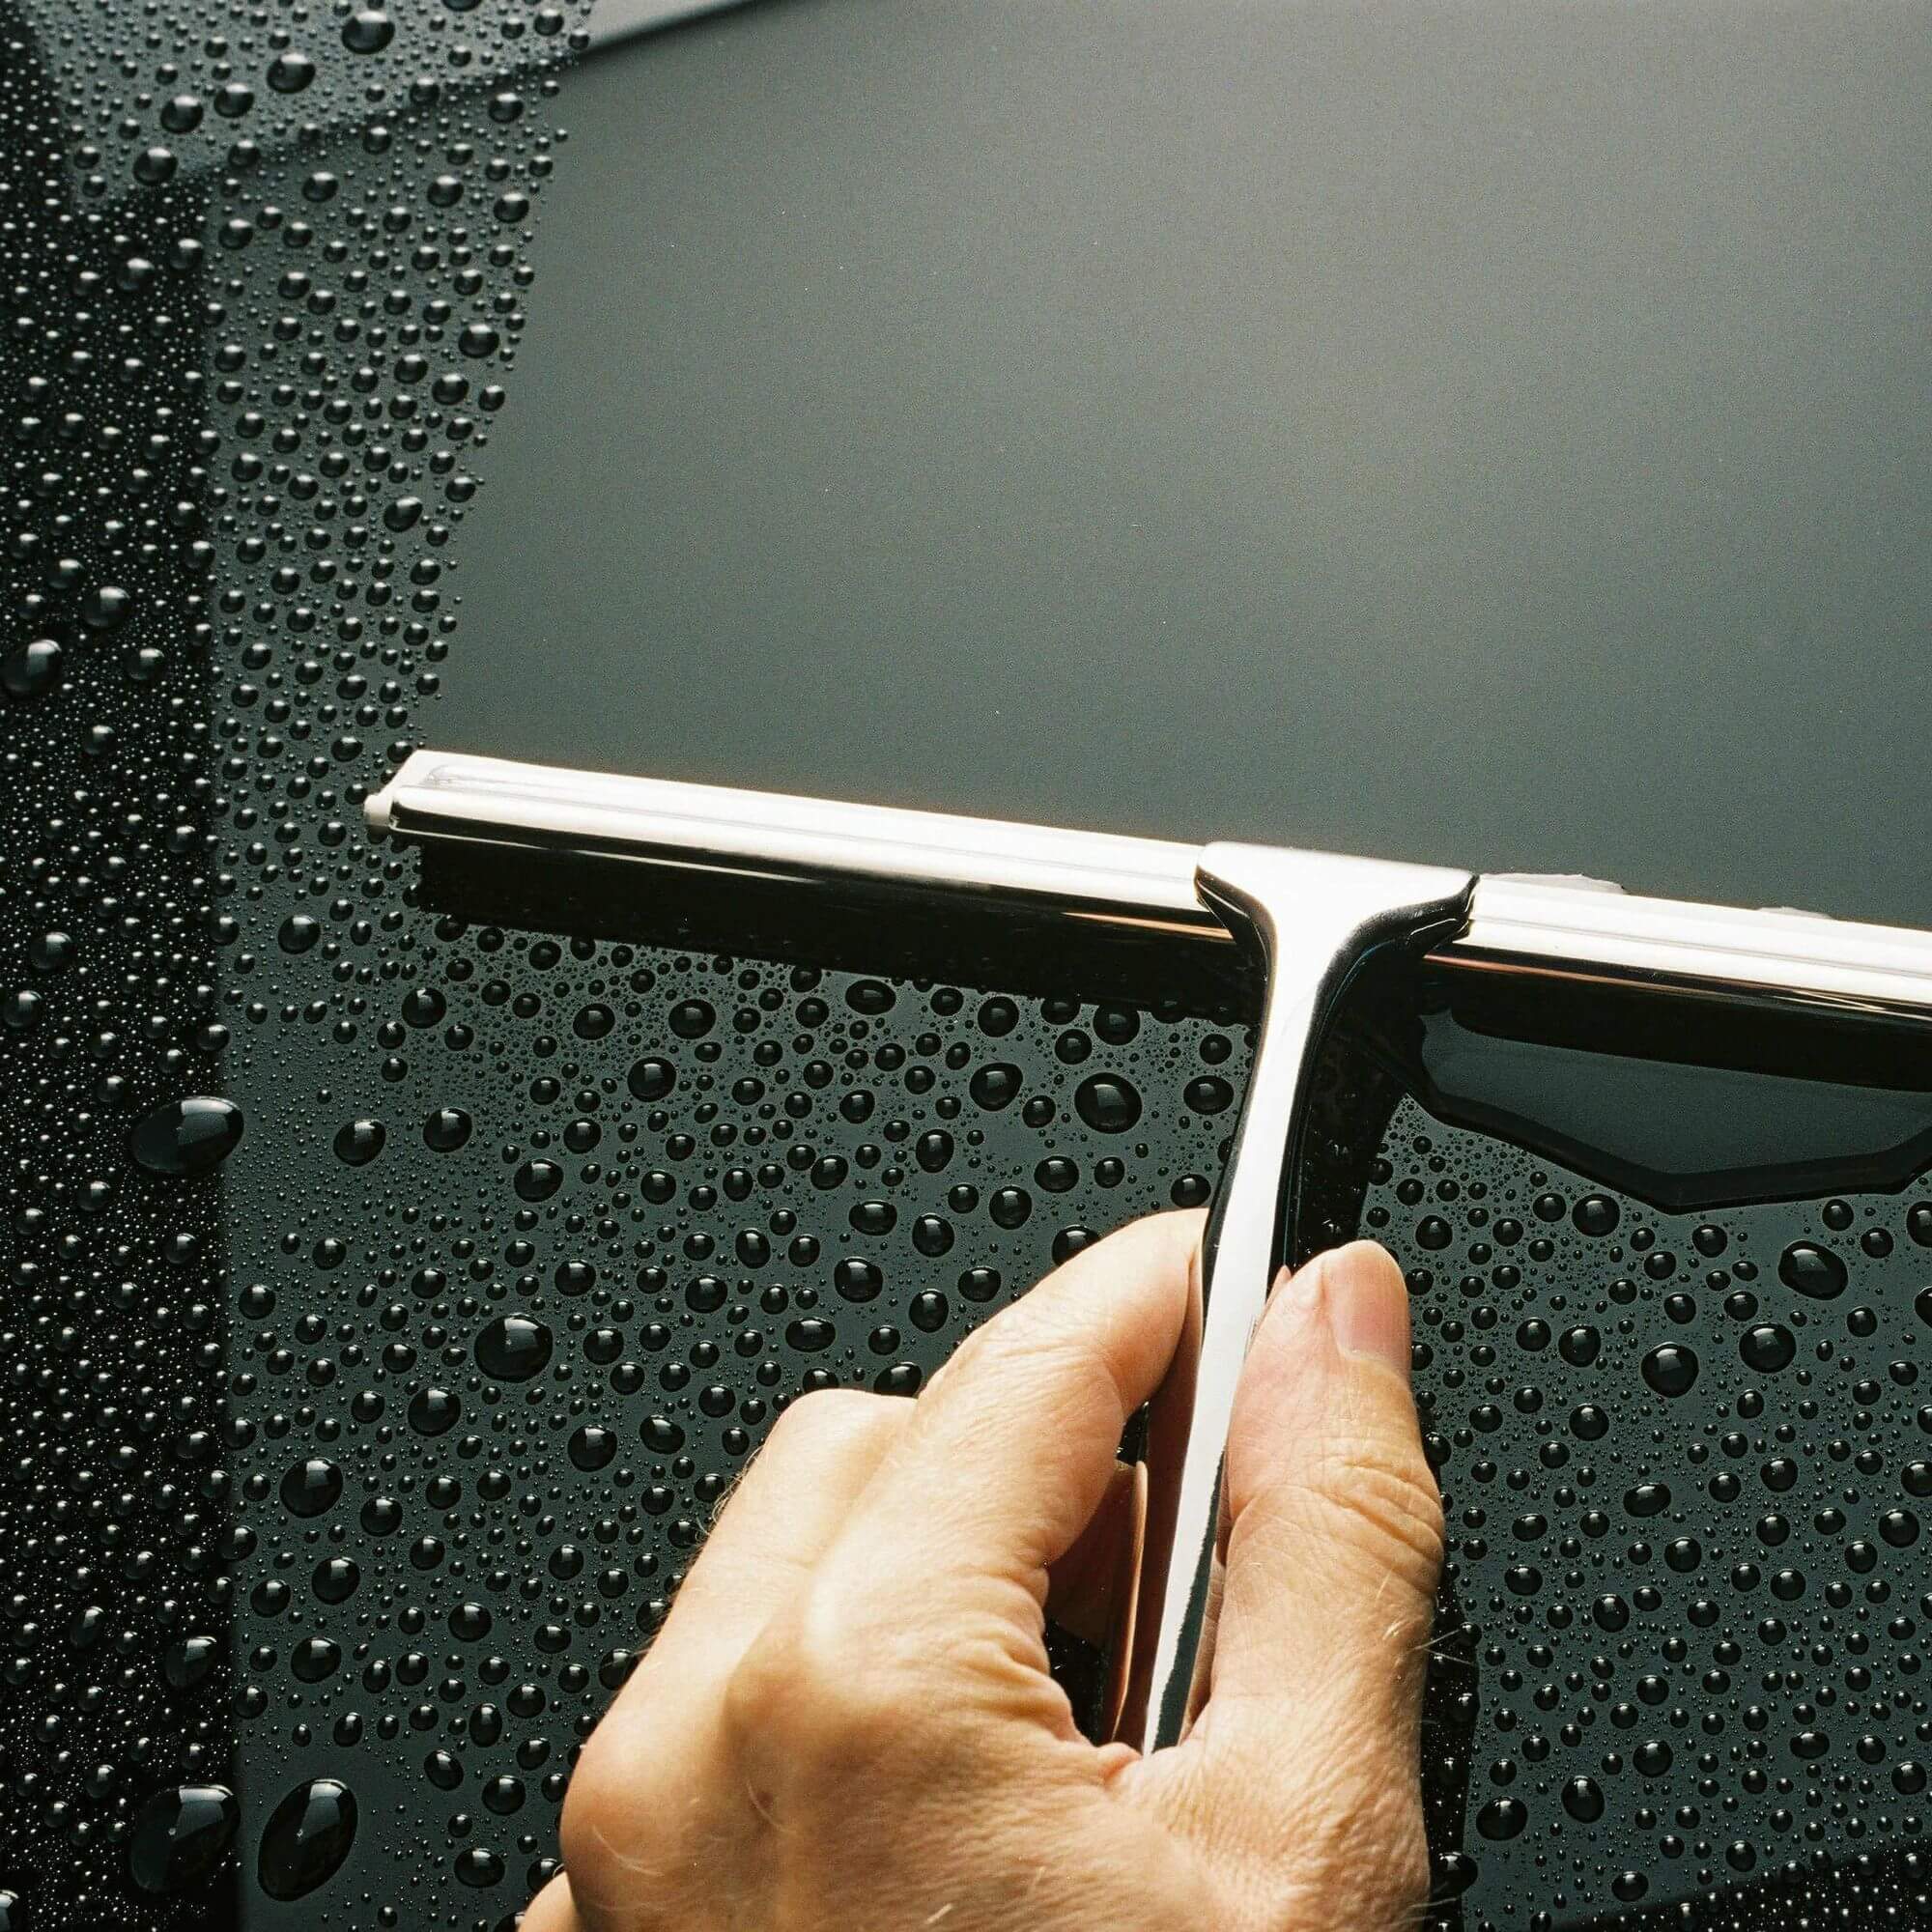 A stainless steel bathroom squeegee cleaning shower glass